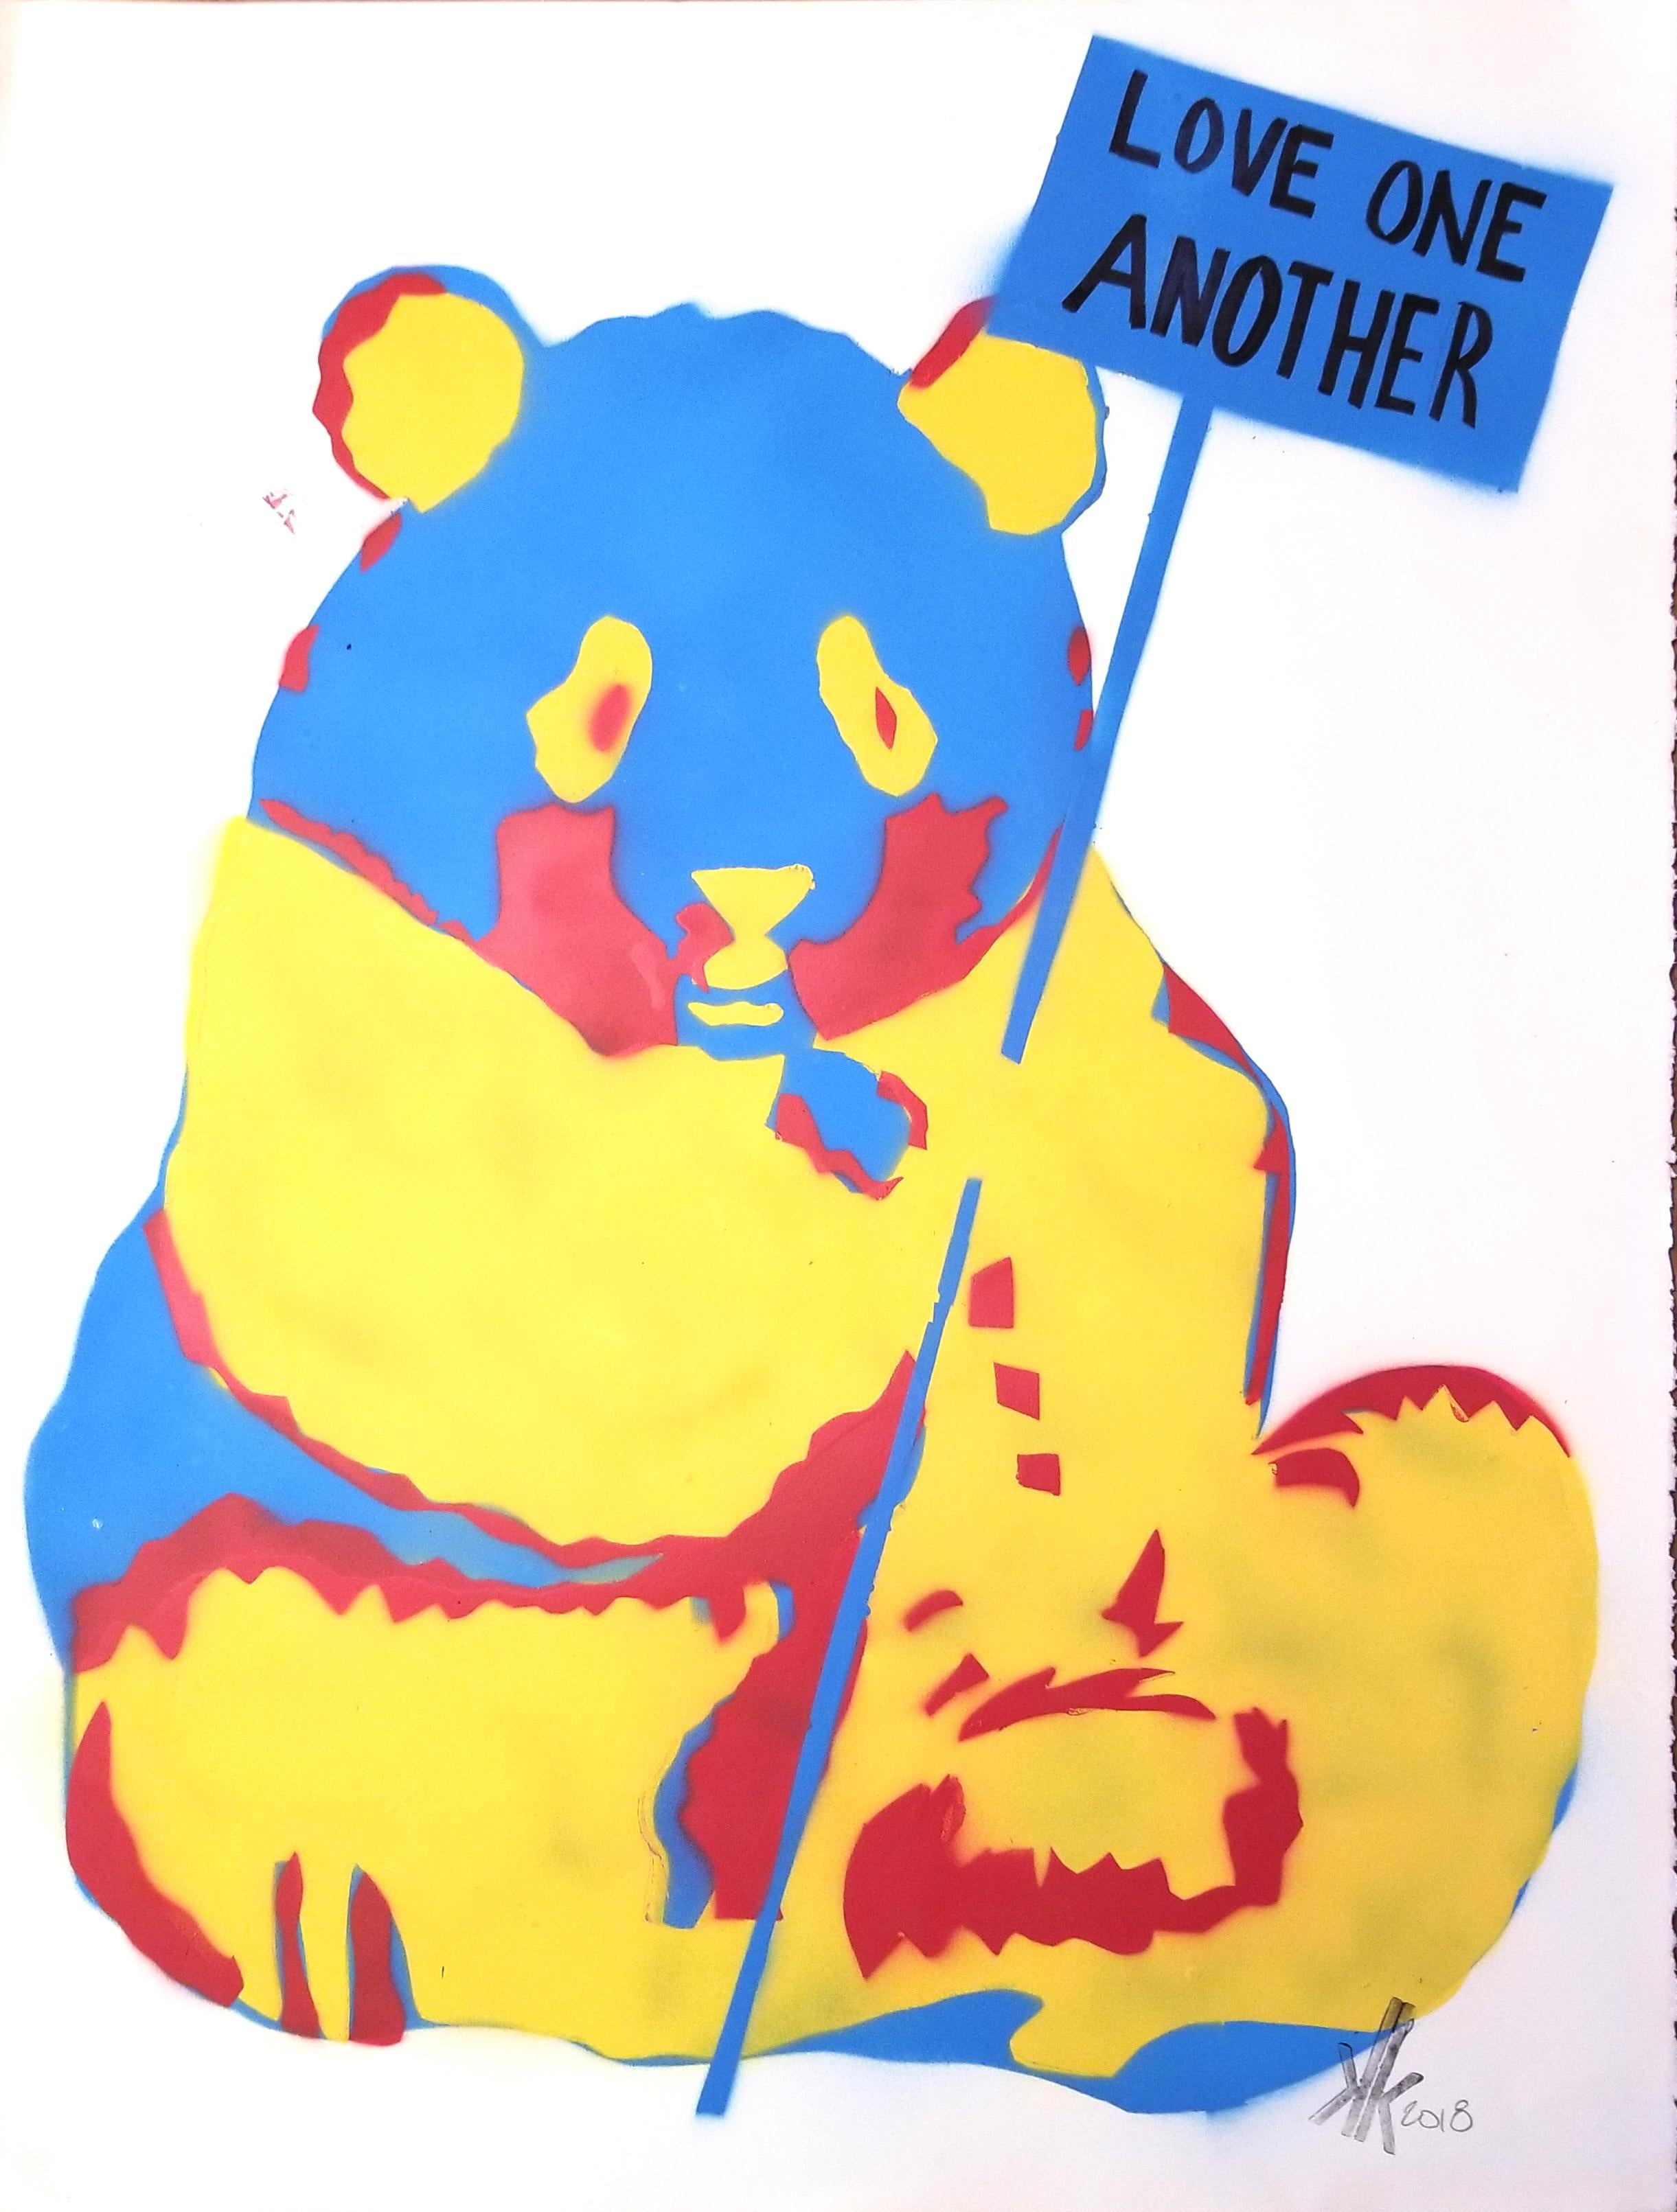 5 Layered Stencil : Red, Yellow, Green
Political Panda Bear hold a HARMONY sign
Showing other  Bears in Series 
Unique pieces
This is on 90lb Paper color: Natural

New York Artist; K.K.
comes rolled in a tube. Can be matted or floated in frame..